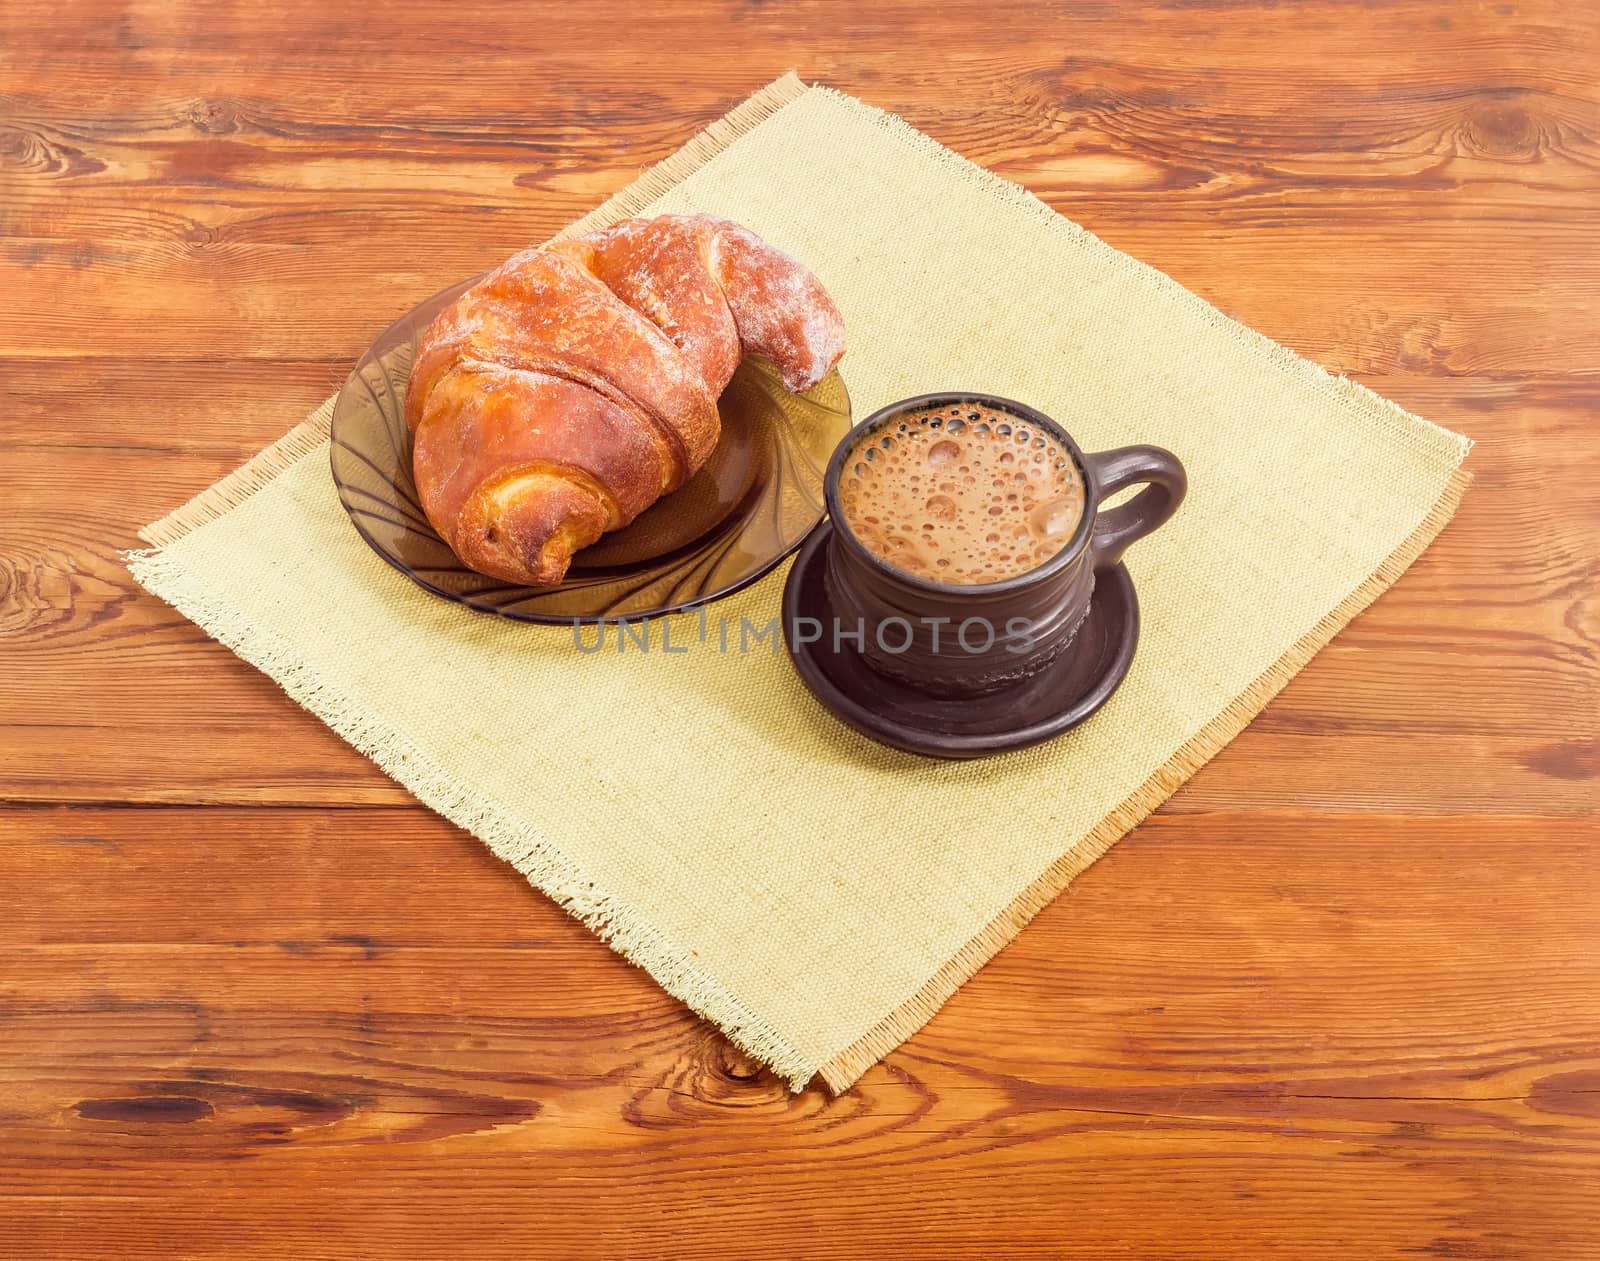 Coffee in black ceramic cup and croissant on glass saucer by anmbph